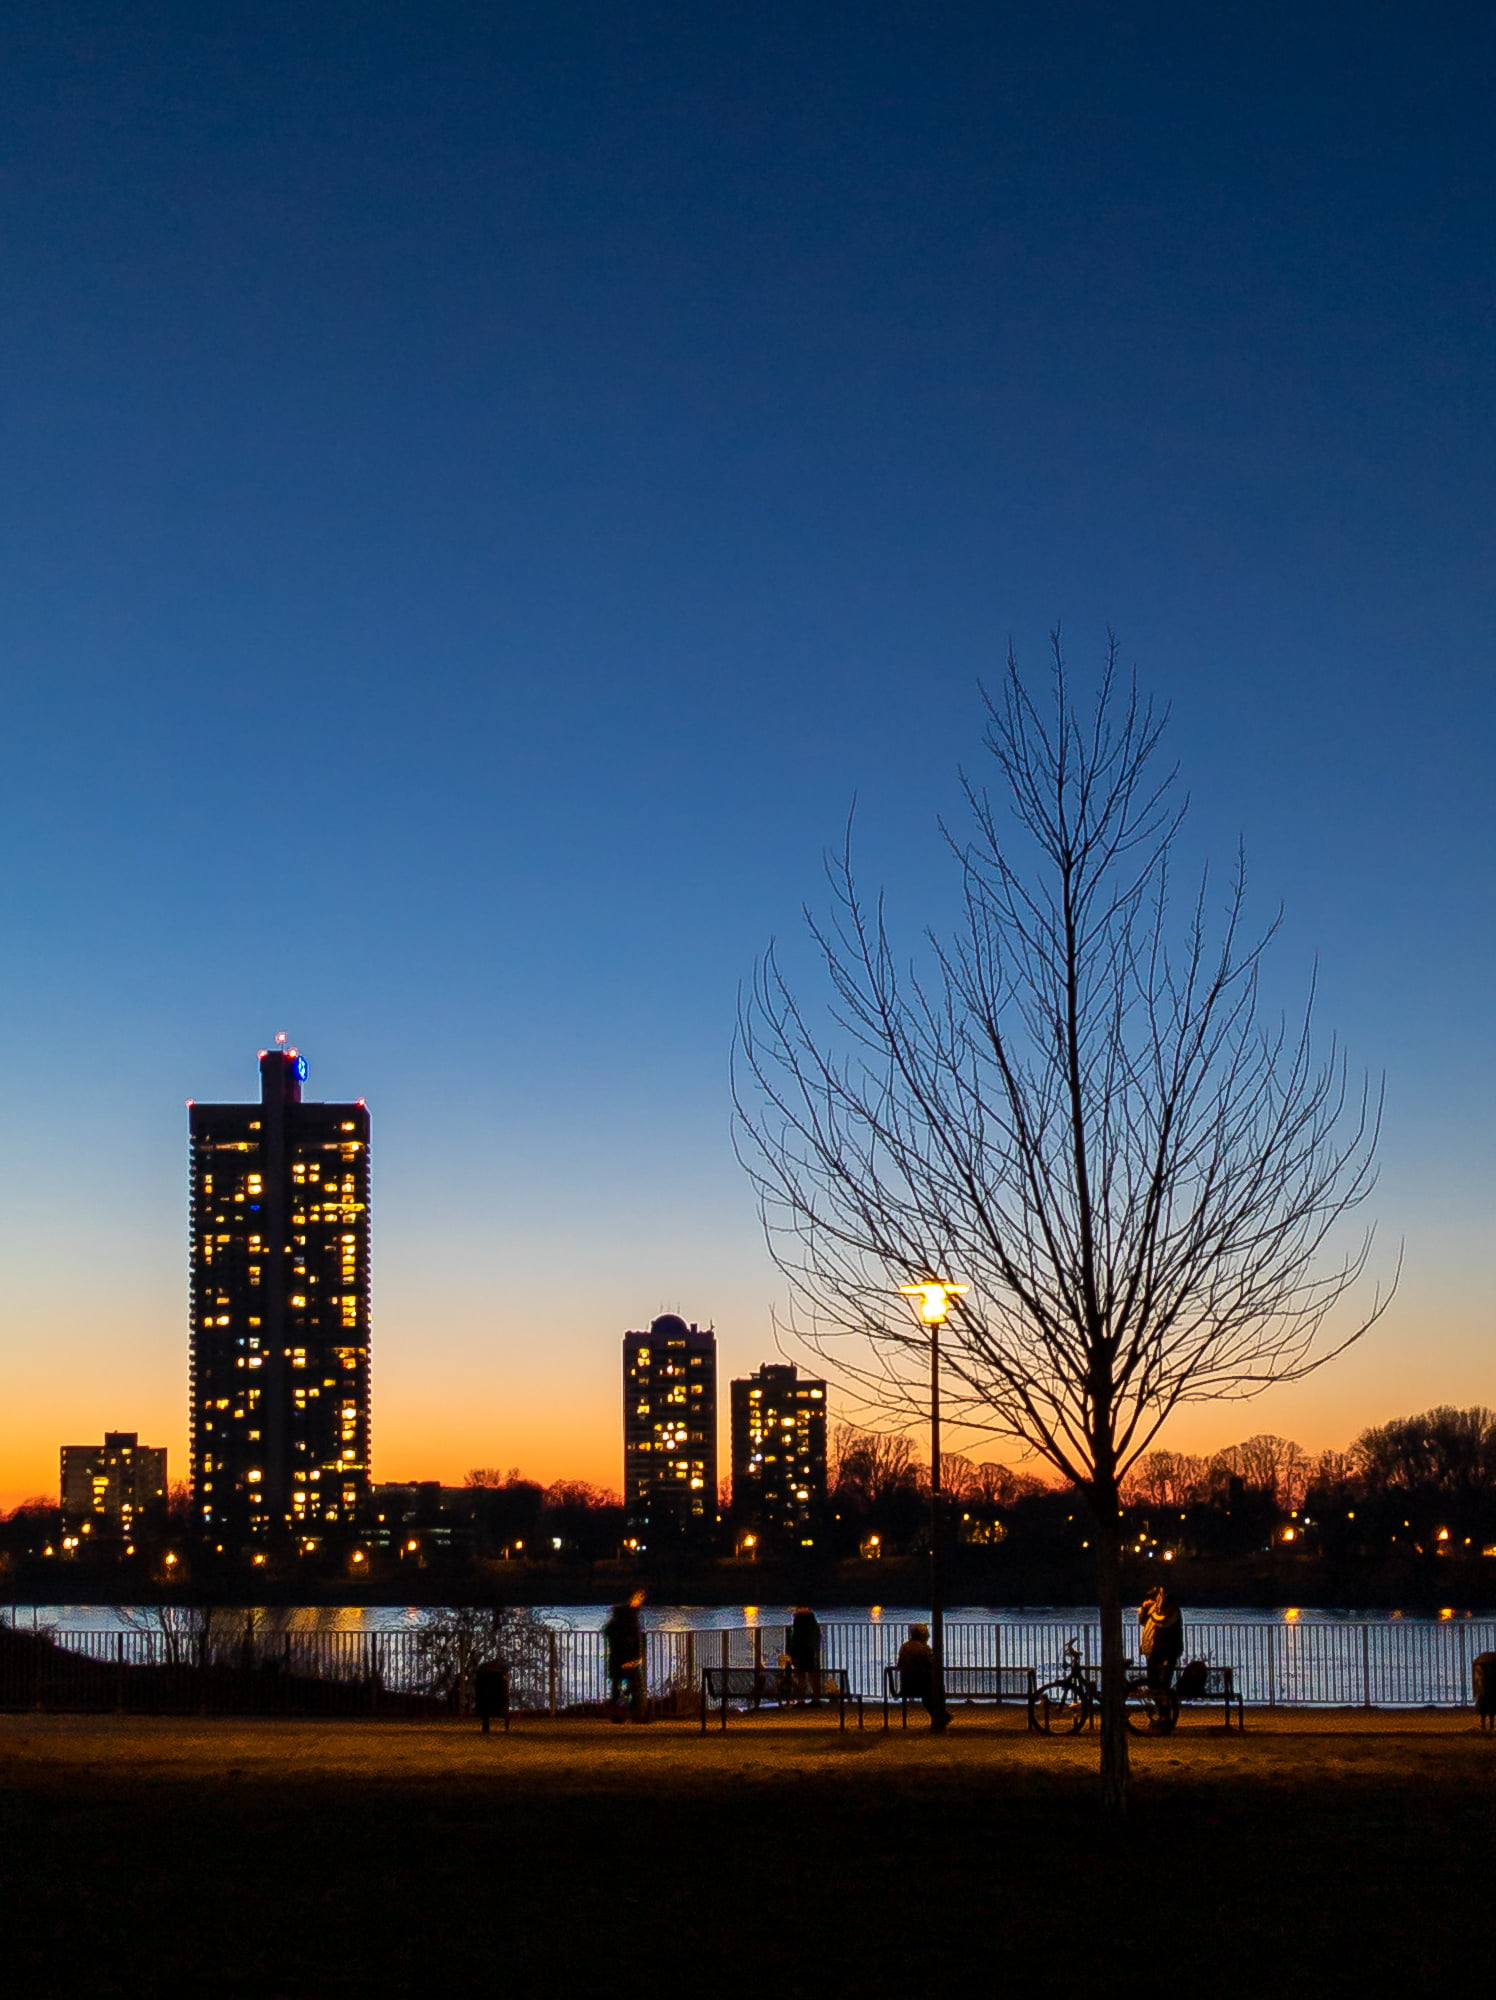 A river bank with some black skyscraper silhouettes on the far side set against a sunset.